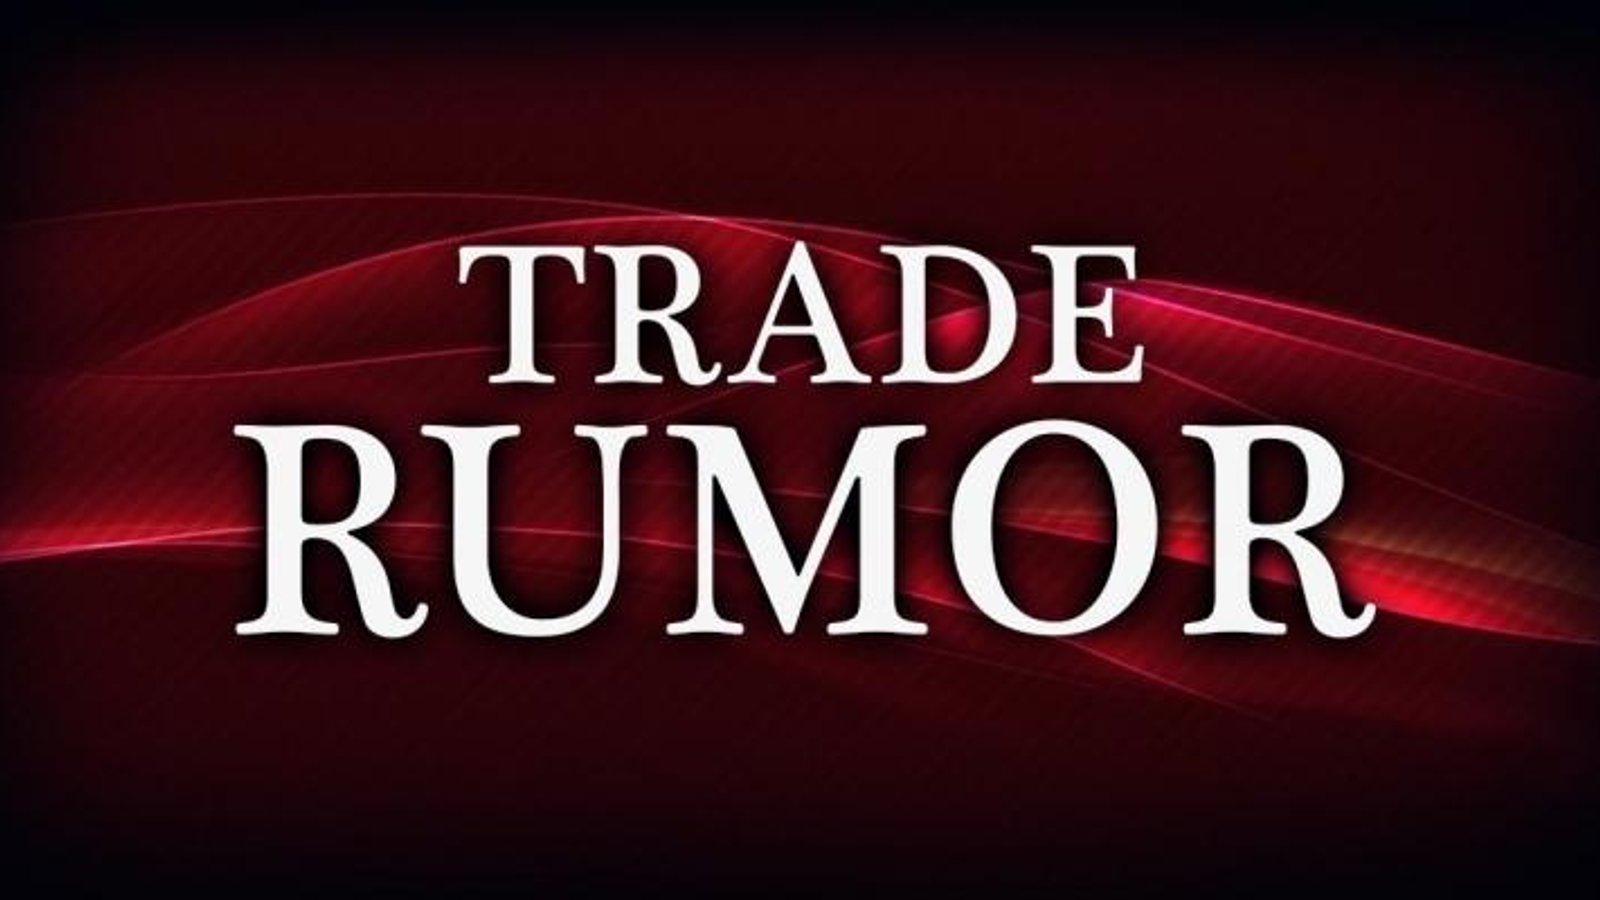 Major trade rumor involving the draft and the #1 overall pick.